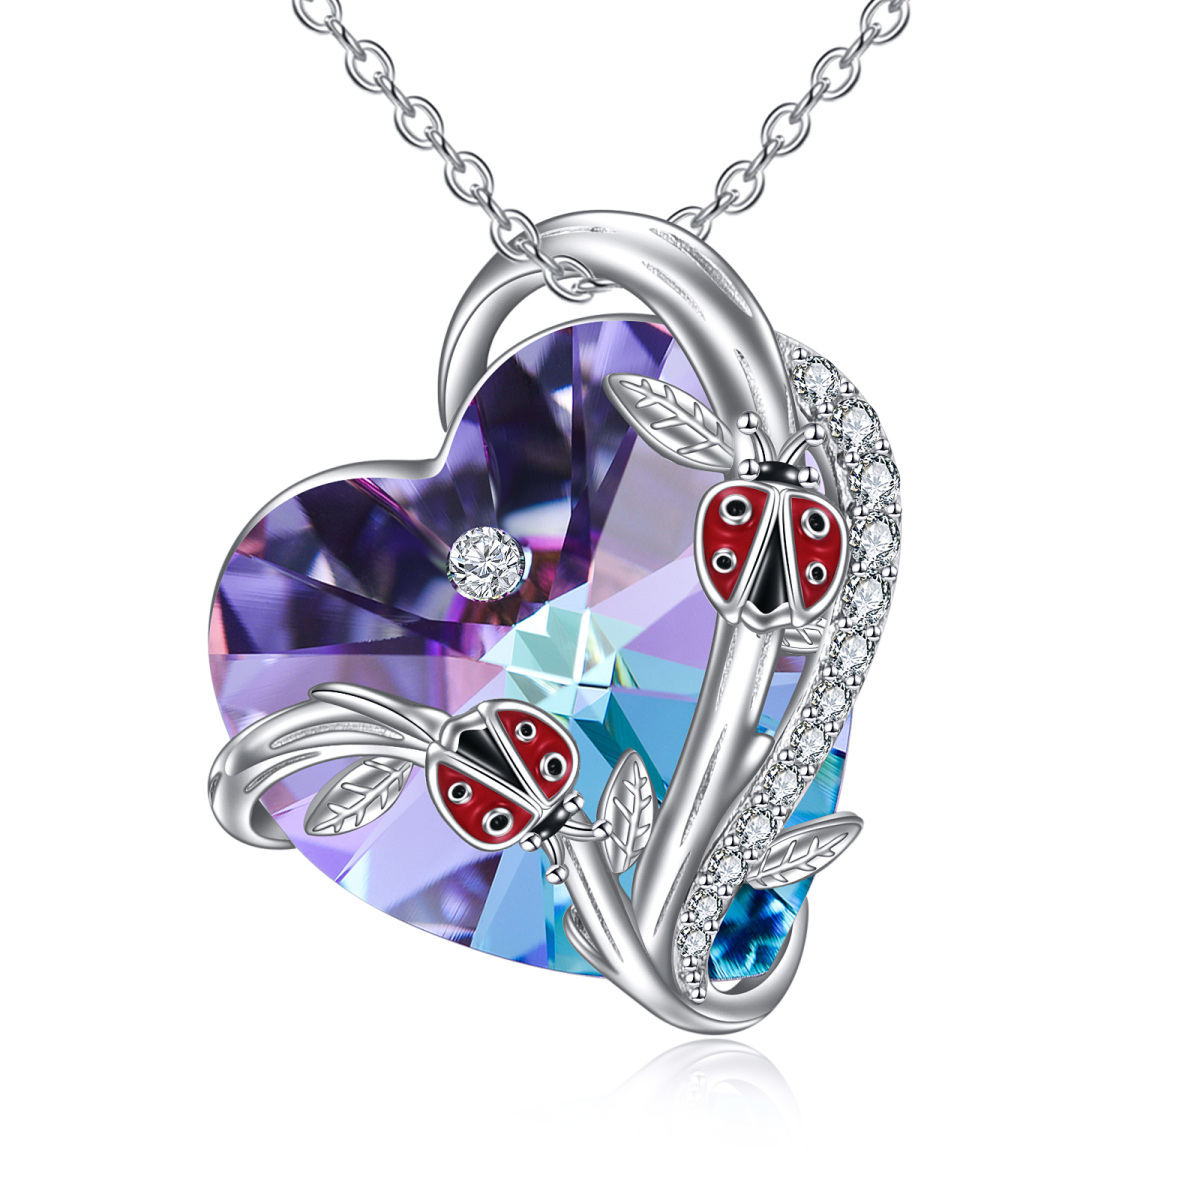 Sterling Silver Circular Shaped & Heart Shaped Ladybug & Heart Crystal Pendant Necklace-1